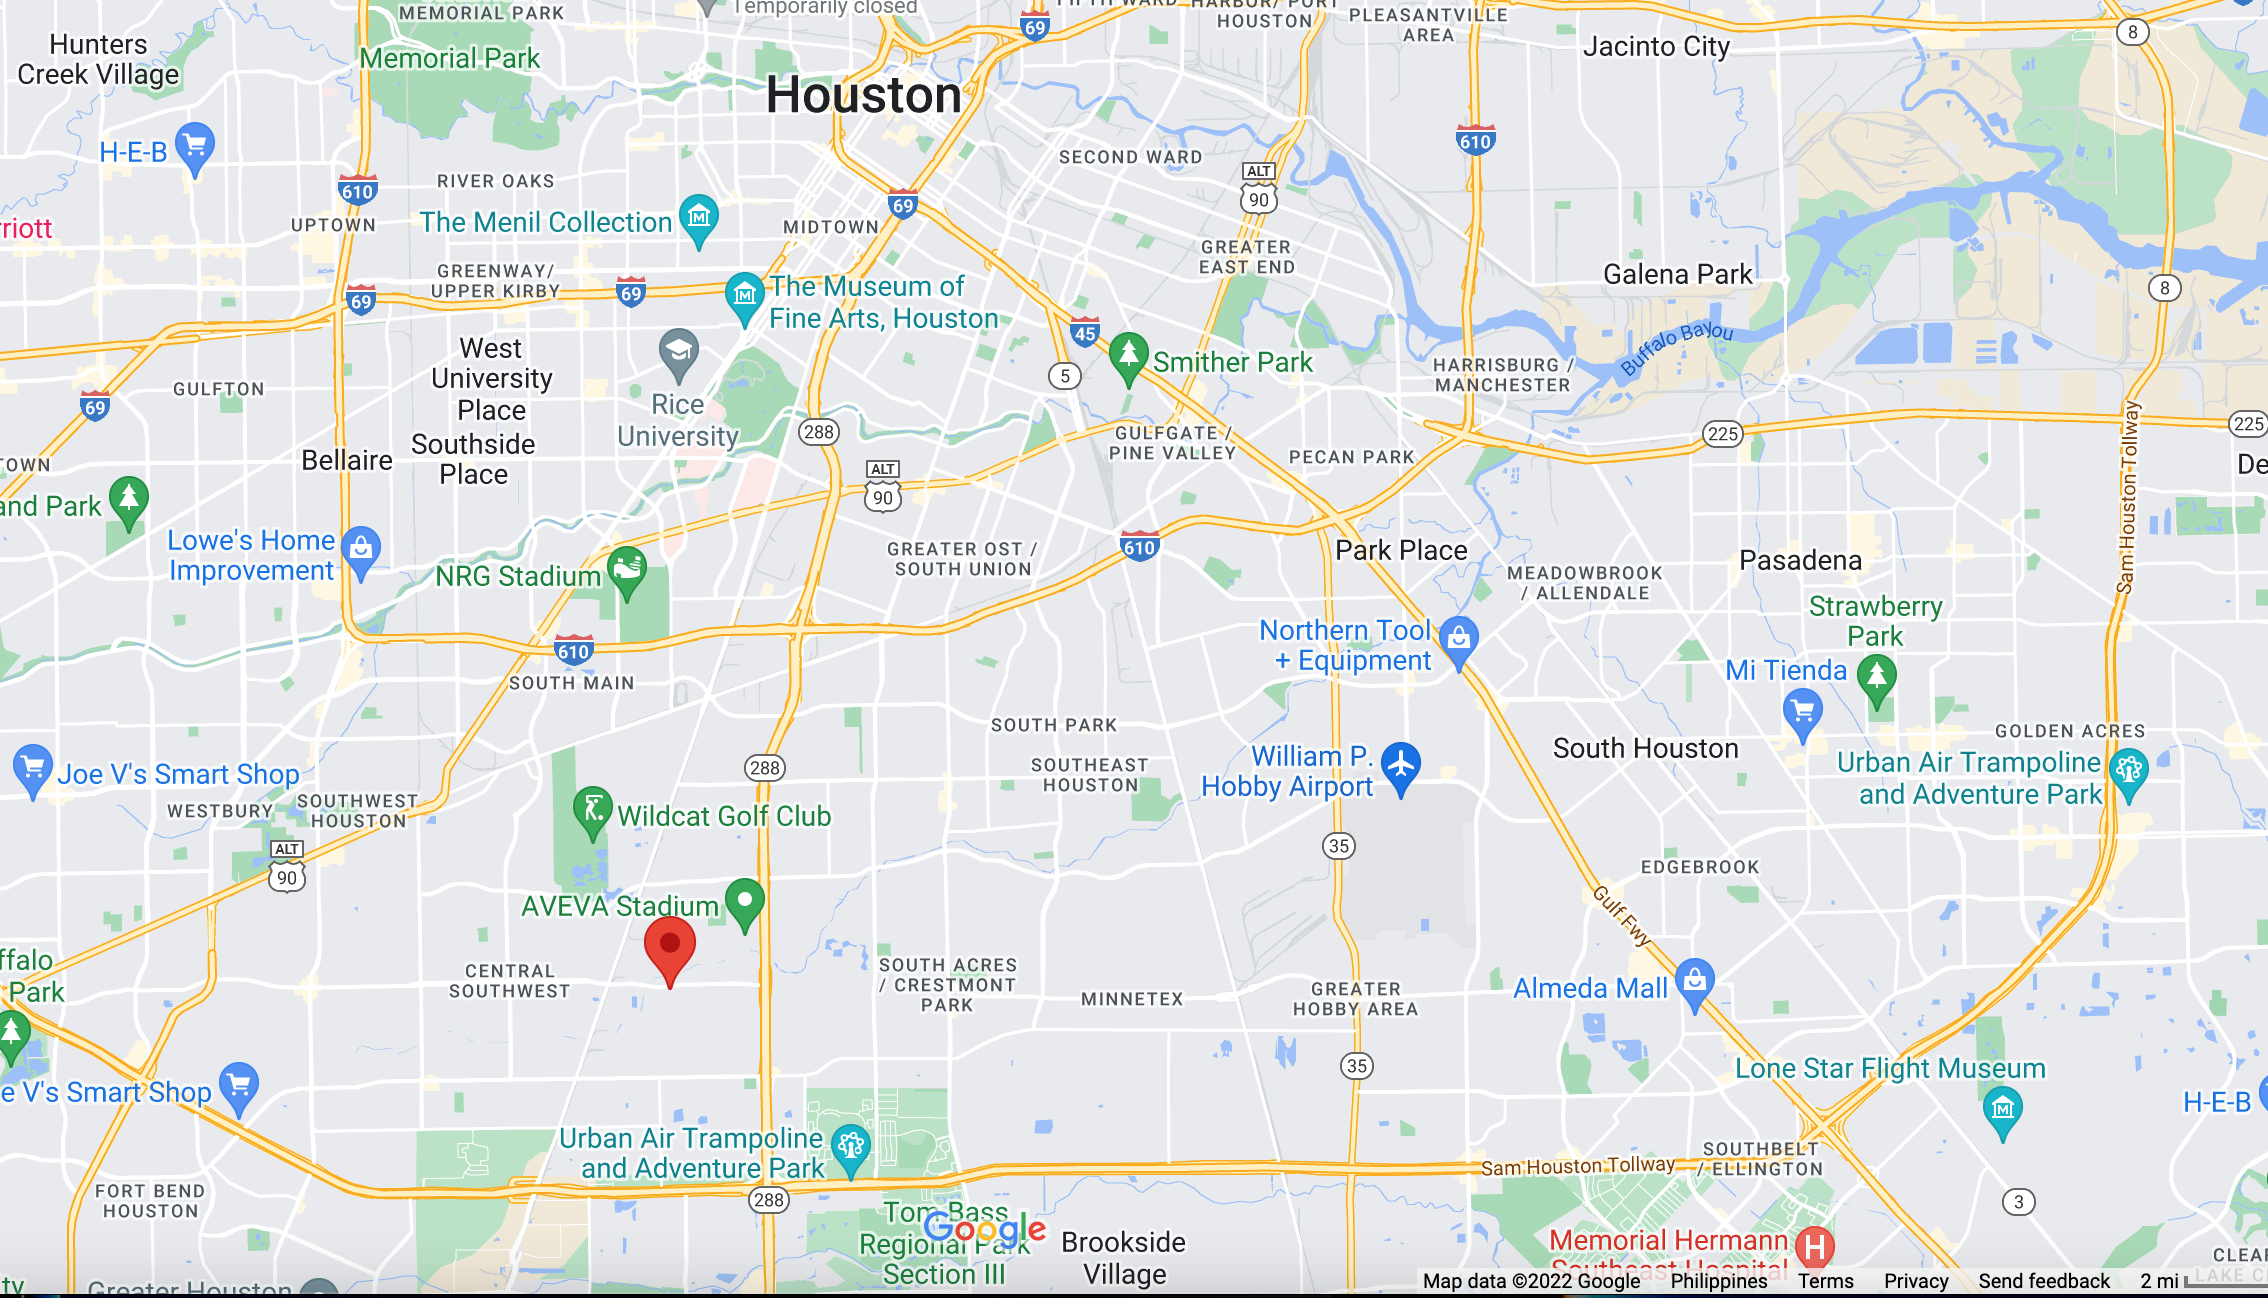 City Park is located in Houston, TX